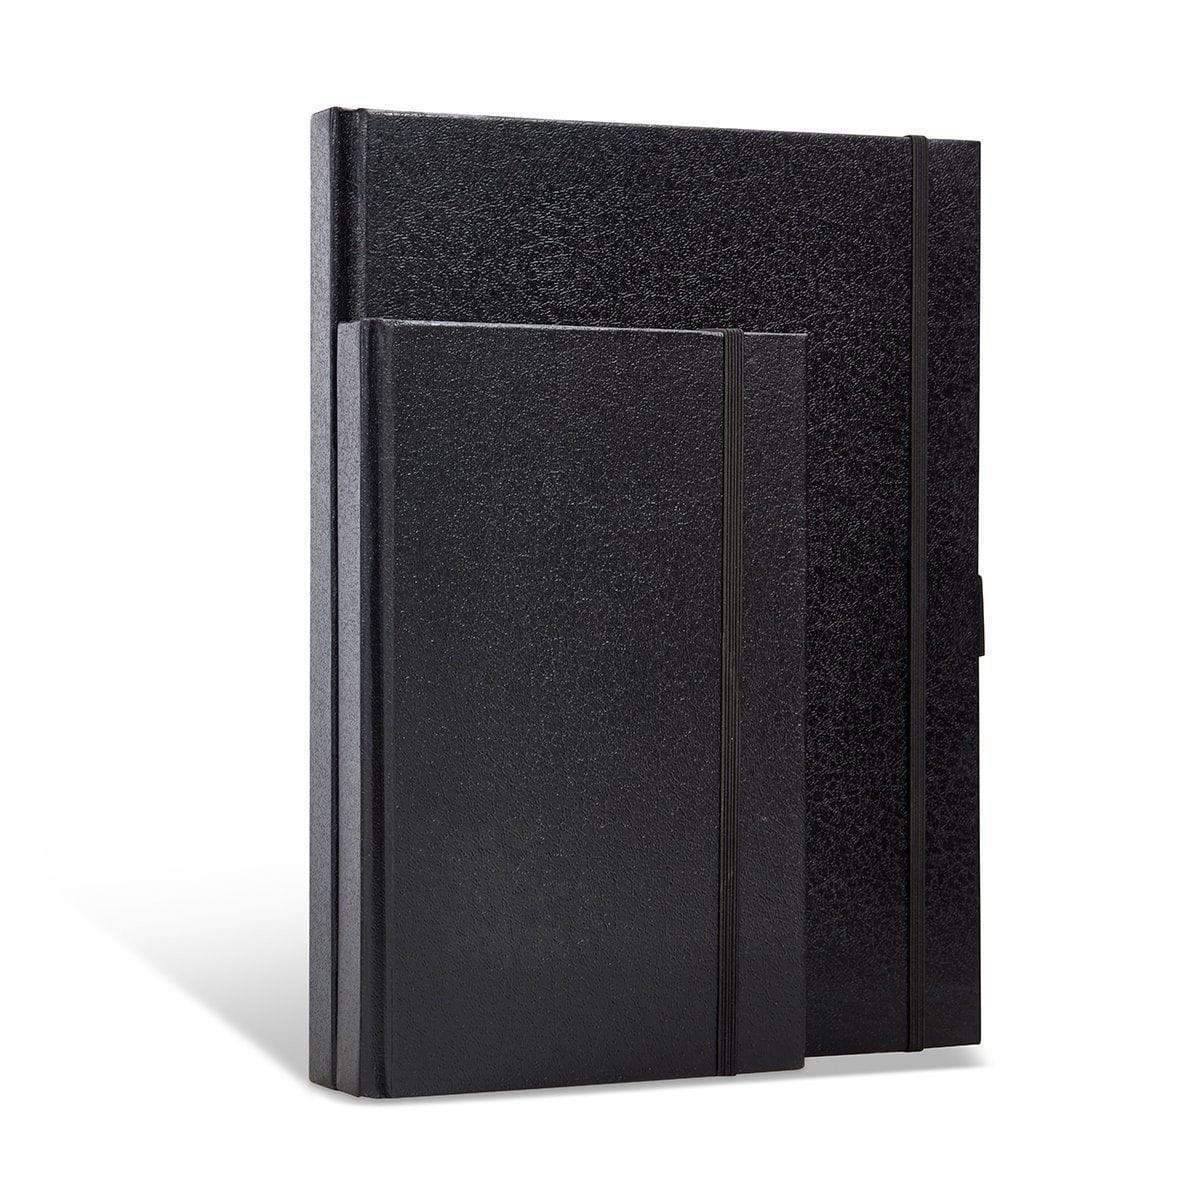  KINGART 625 Black Hardcover 8.5 x 11 Sketchbook Journal,  Perfect Bound, Acid-Free, Finely Textured for Wet & Dry Media, 160 Pages /  80 Sheets : Arts, Crafts & Sewing